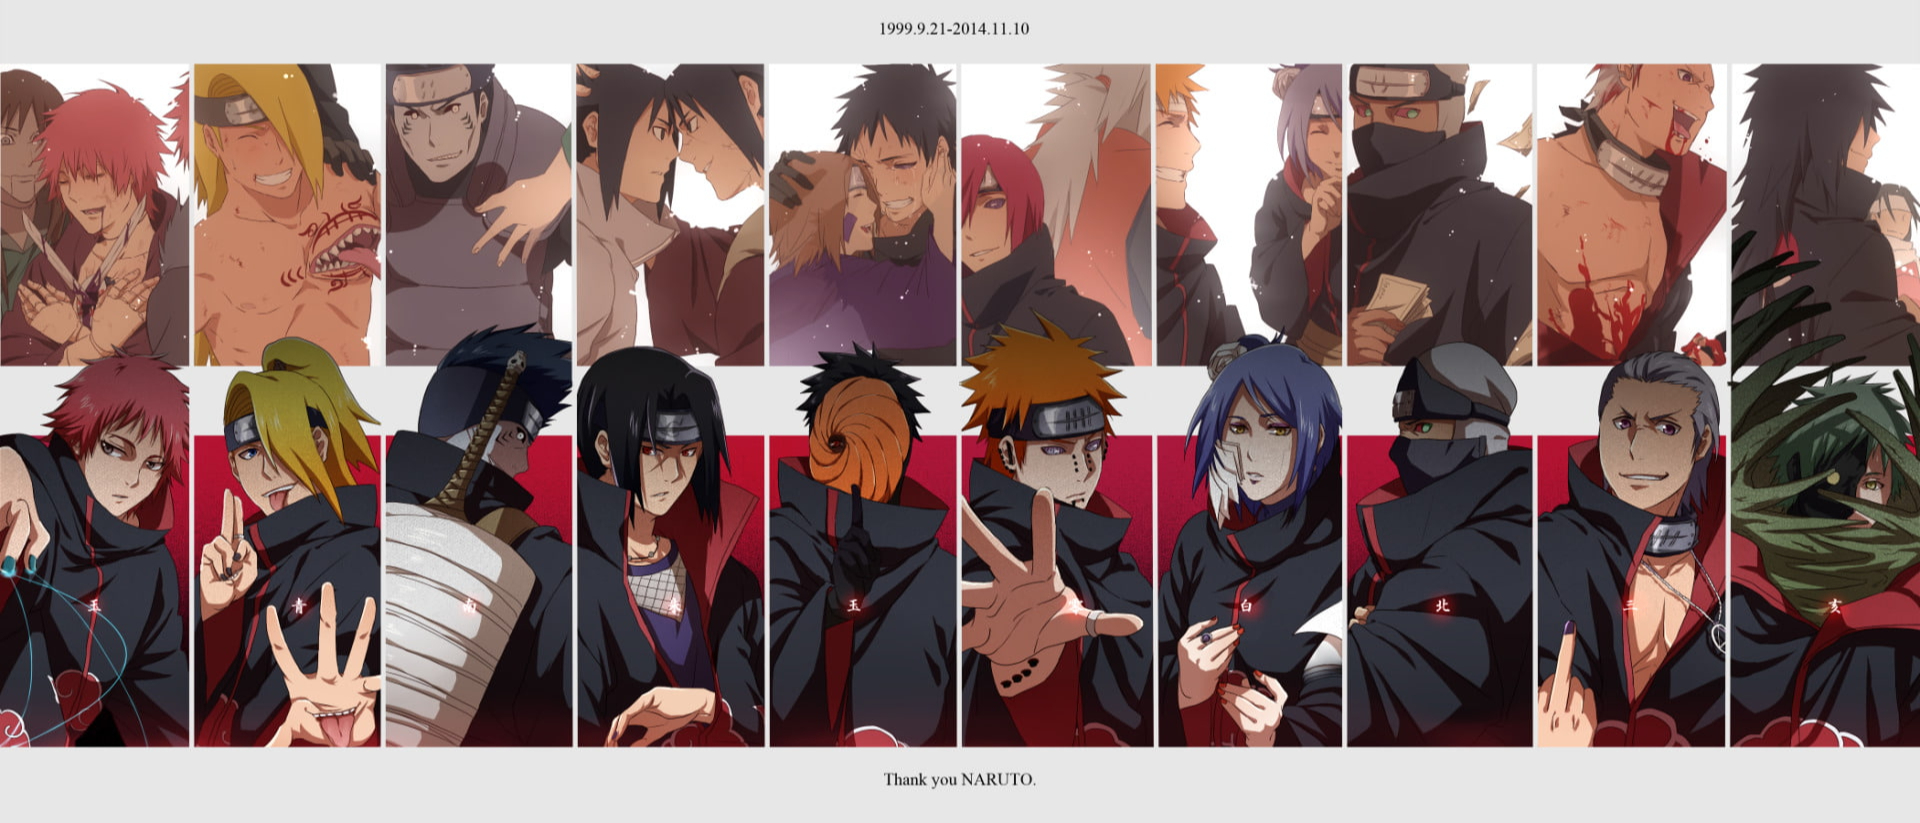 Akatsuki Collage by Knuckle Head